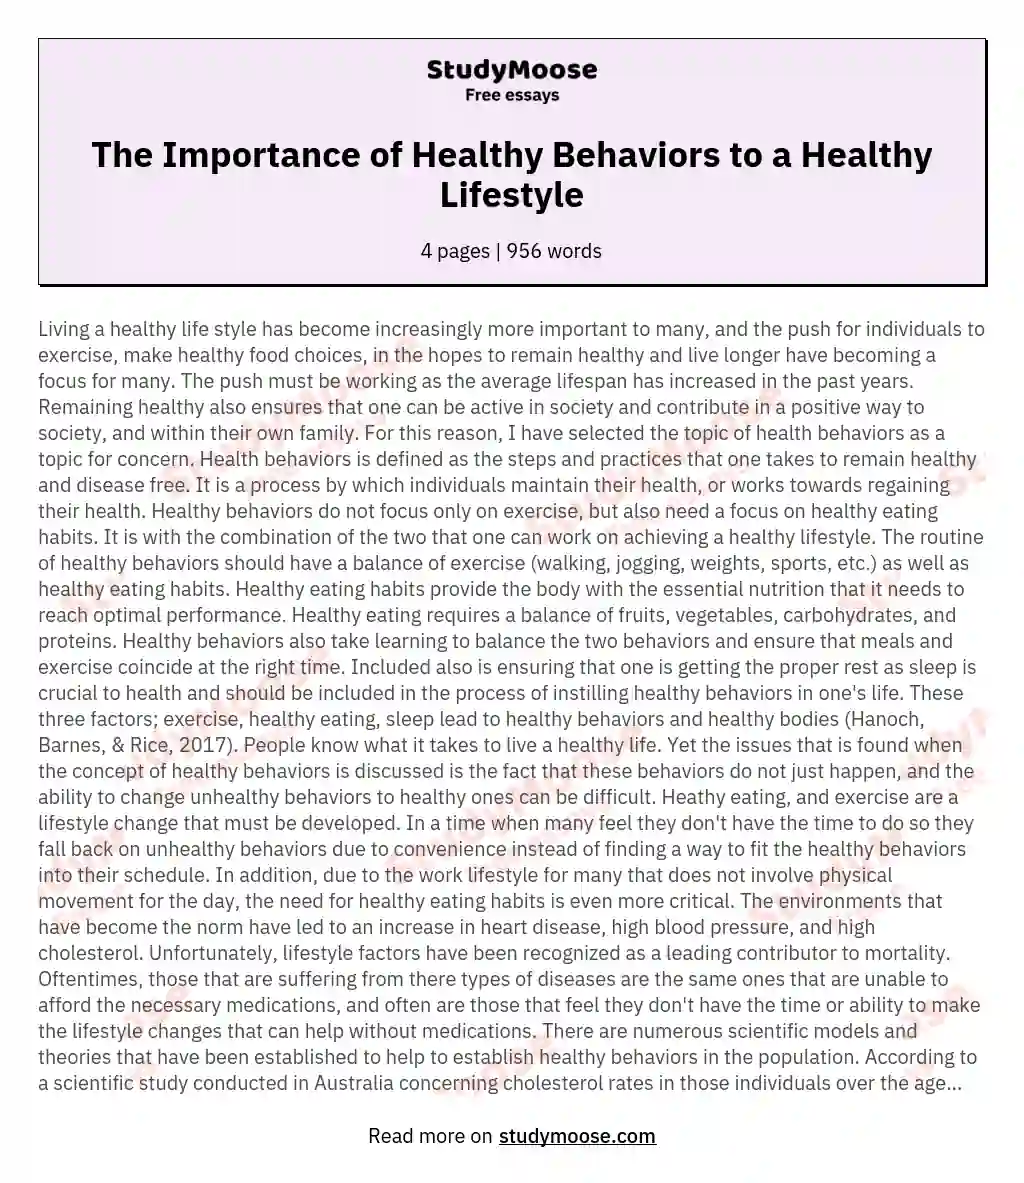 The Importance of Healthy Behaviors to a Healthy Lifestyle essay